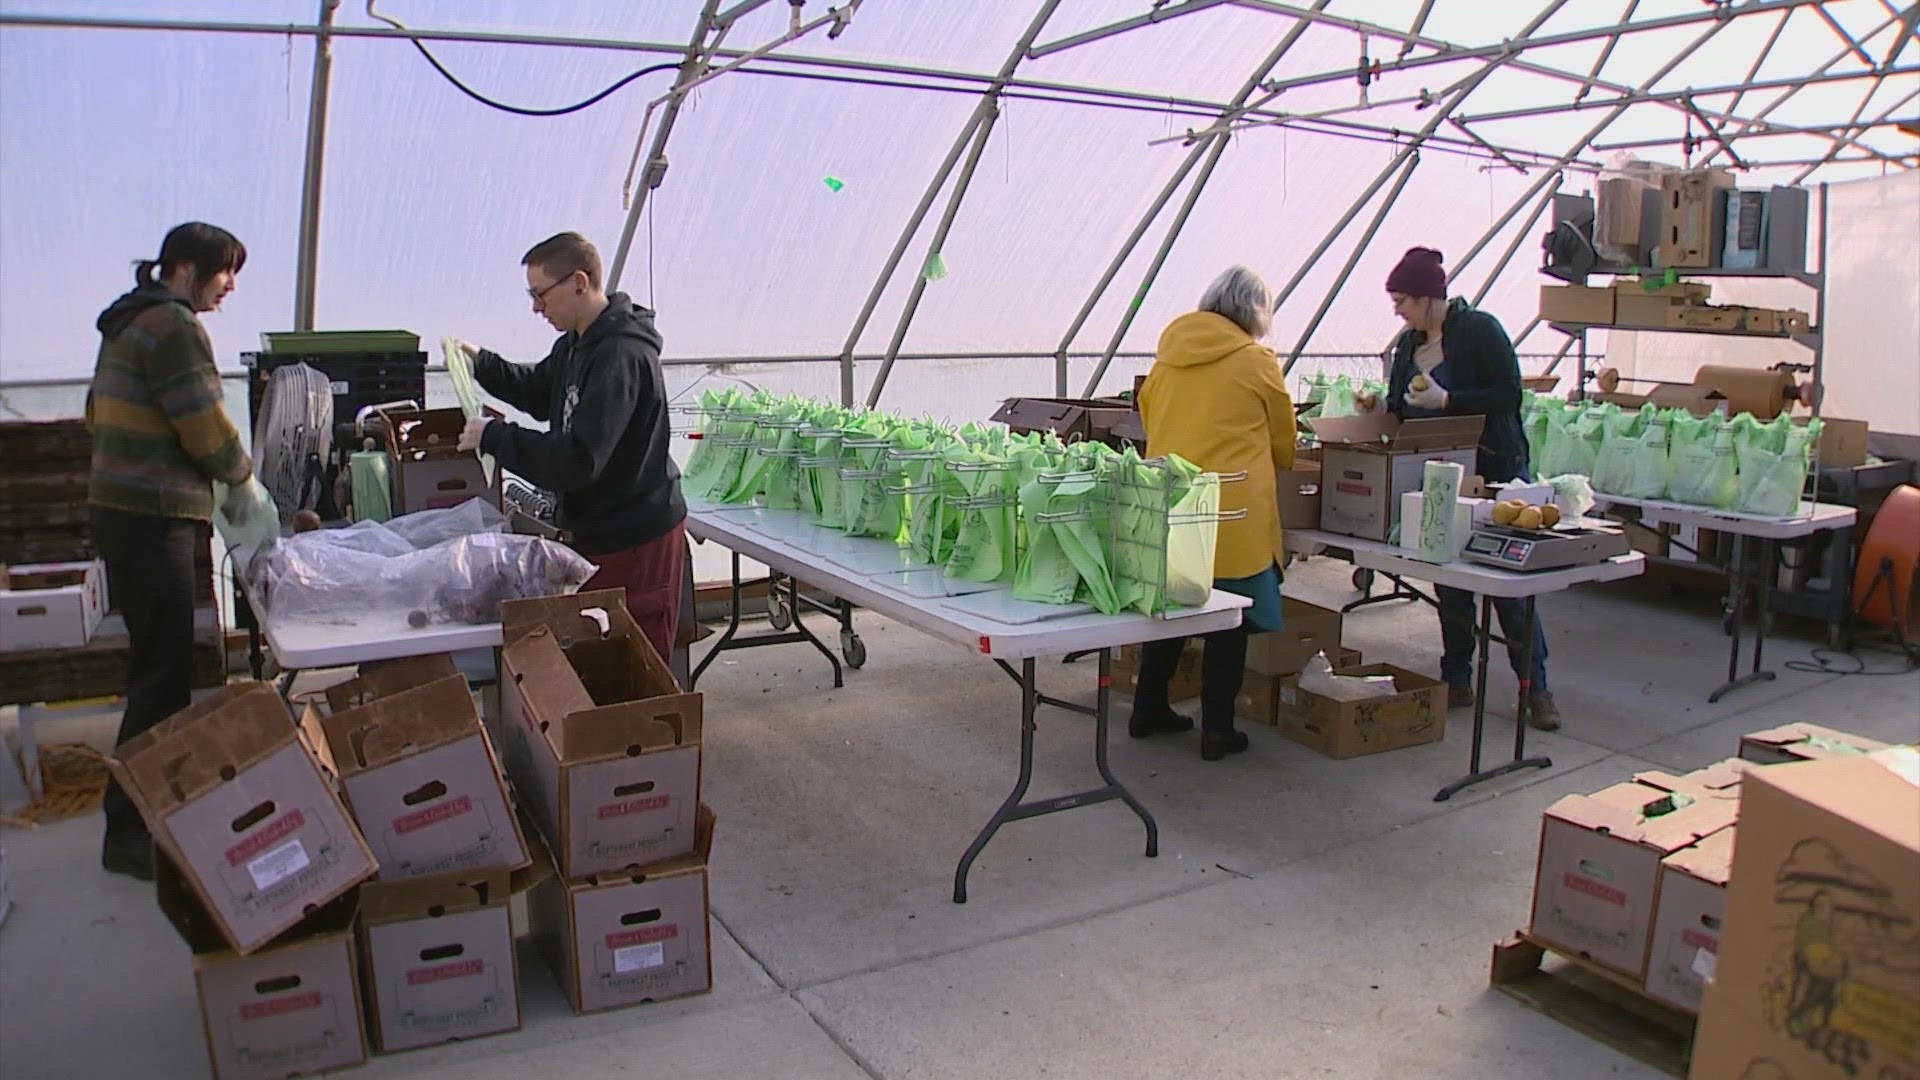 Buying fresh produce isn't a reality for thousands of families in King County who face food insecurity. That's where this nonprofit steps in.